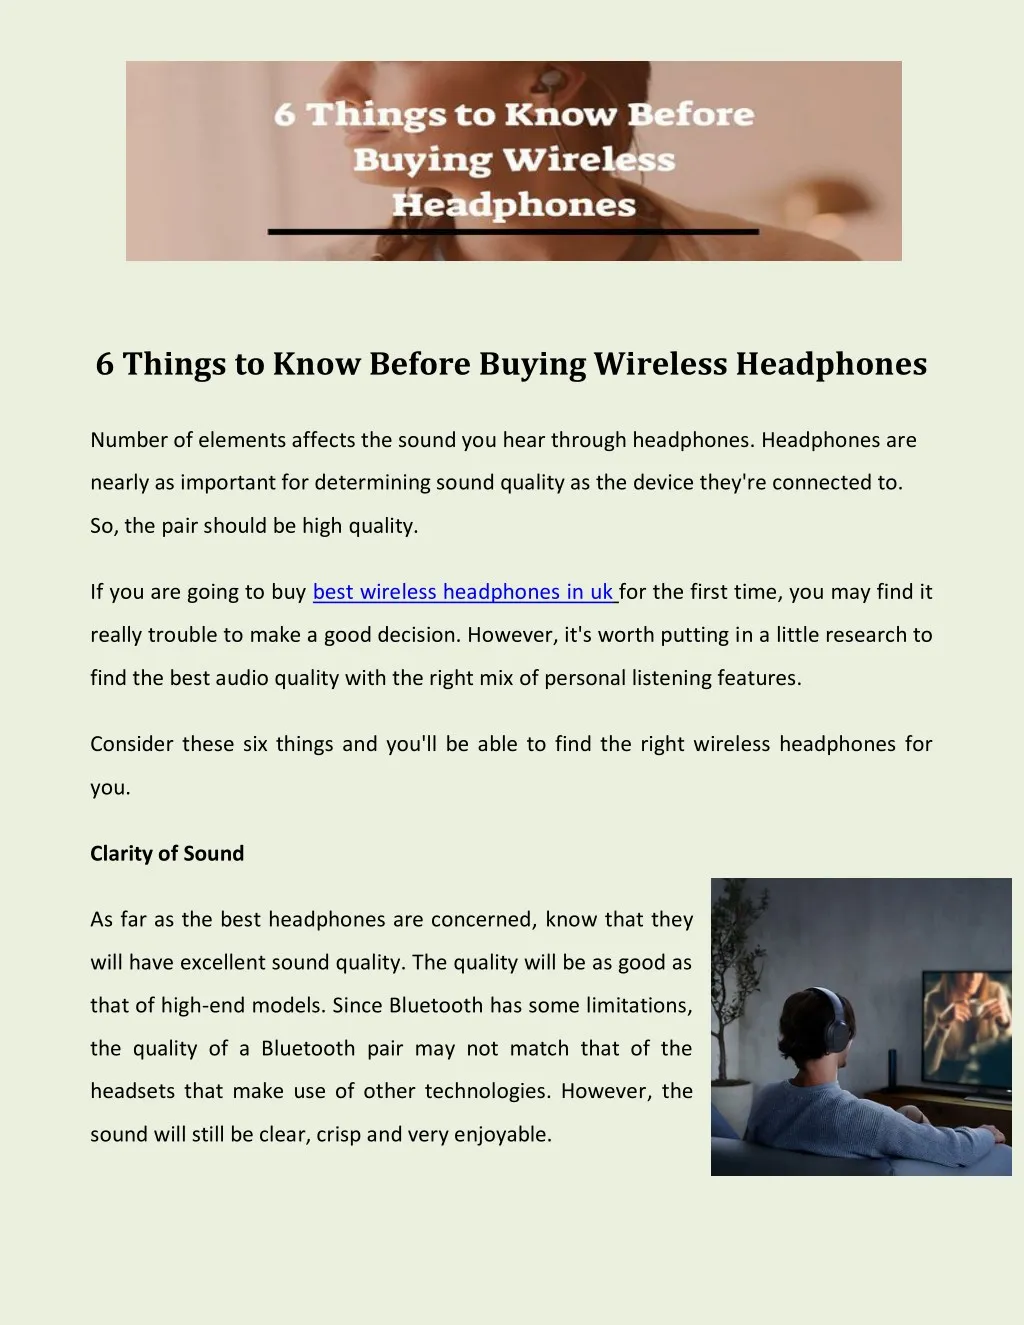 6 things to know before buying wireless headphones